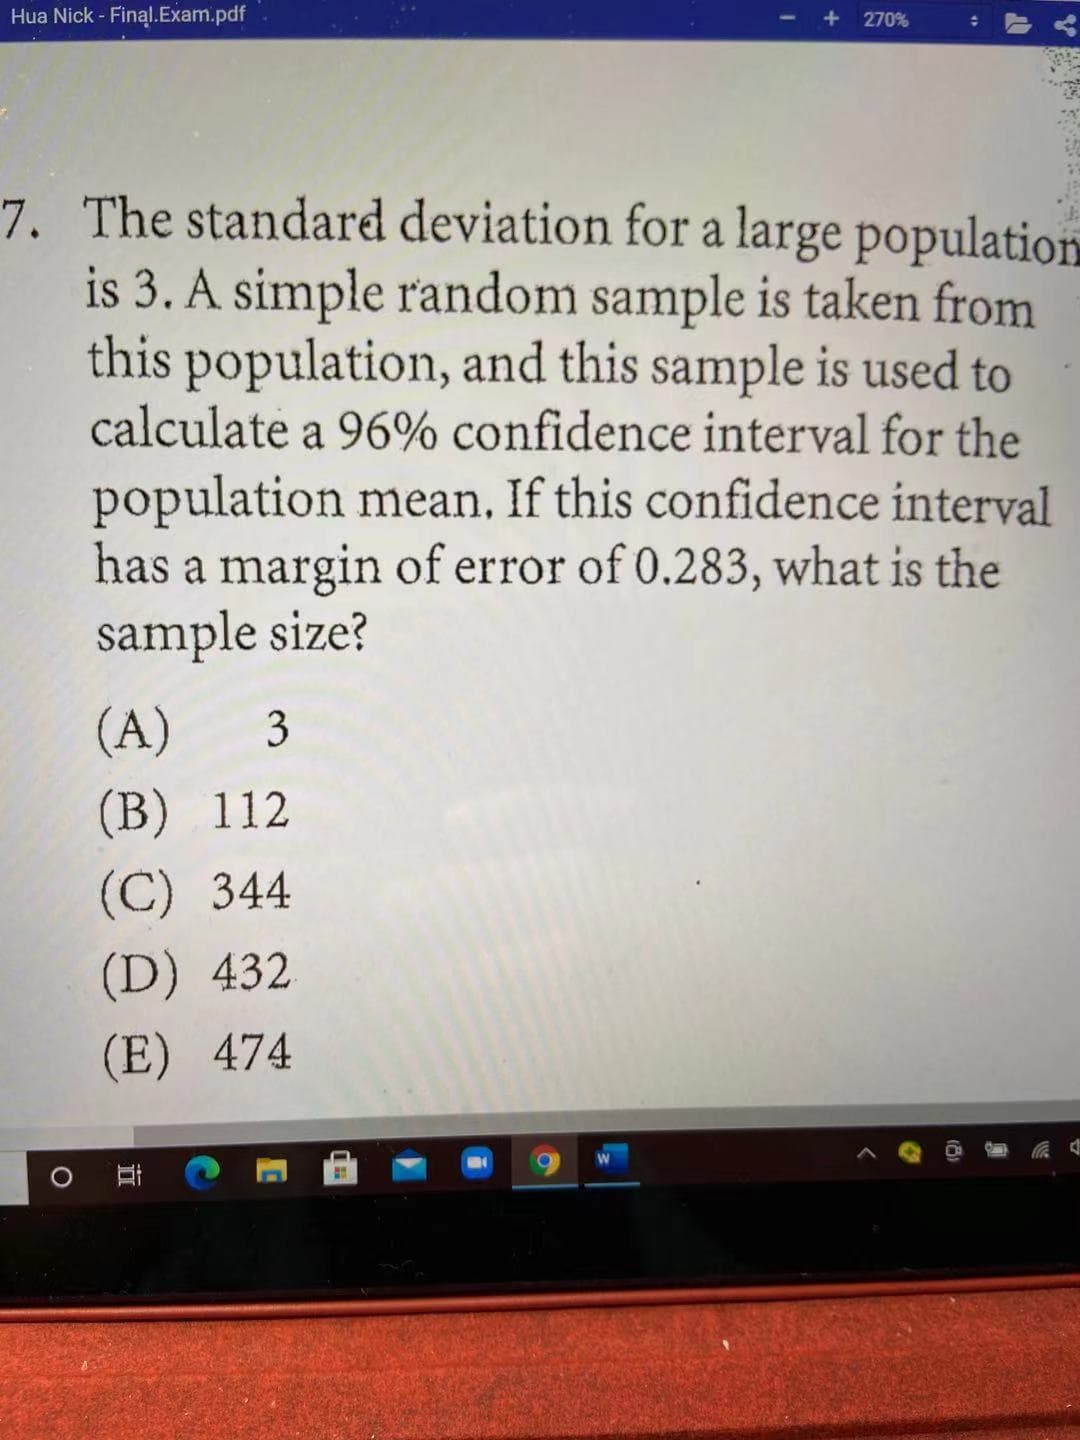 Hua Nick - Final.Exam.pdf
270%
7. The standard deviation for a large population
is 3. A simple random sample is taken from
this population, and this sample is used to
calculate a 96% confidence interval for the
population mean. If this confidence interval
has a margin of error of 0.283, what is the
sample size?
(A)
3
(В) 112
(C) 344
(D) 432
(E) 474
立
